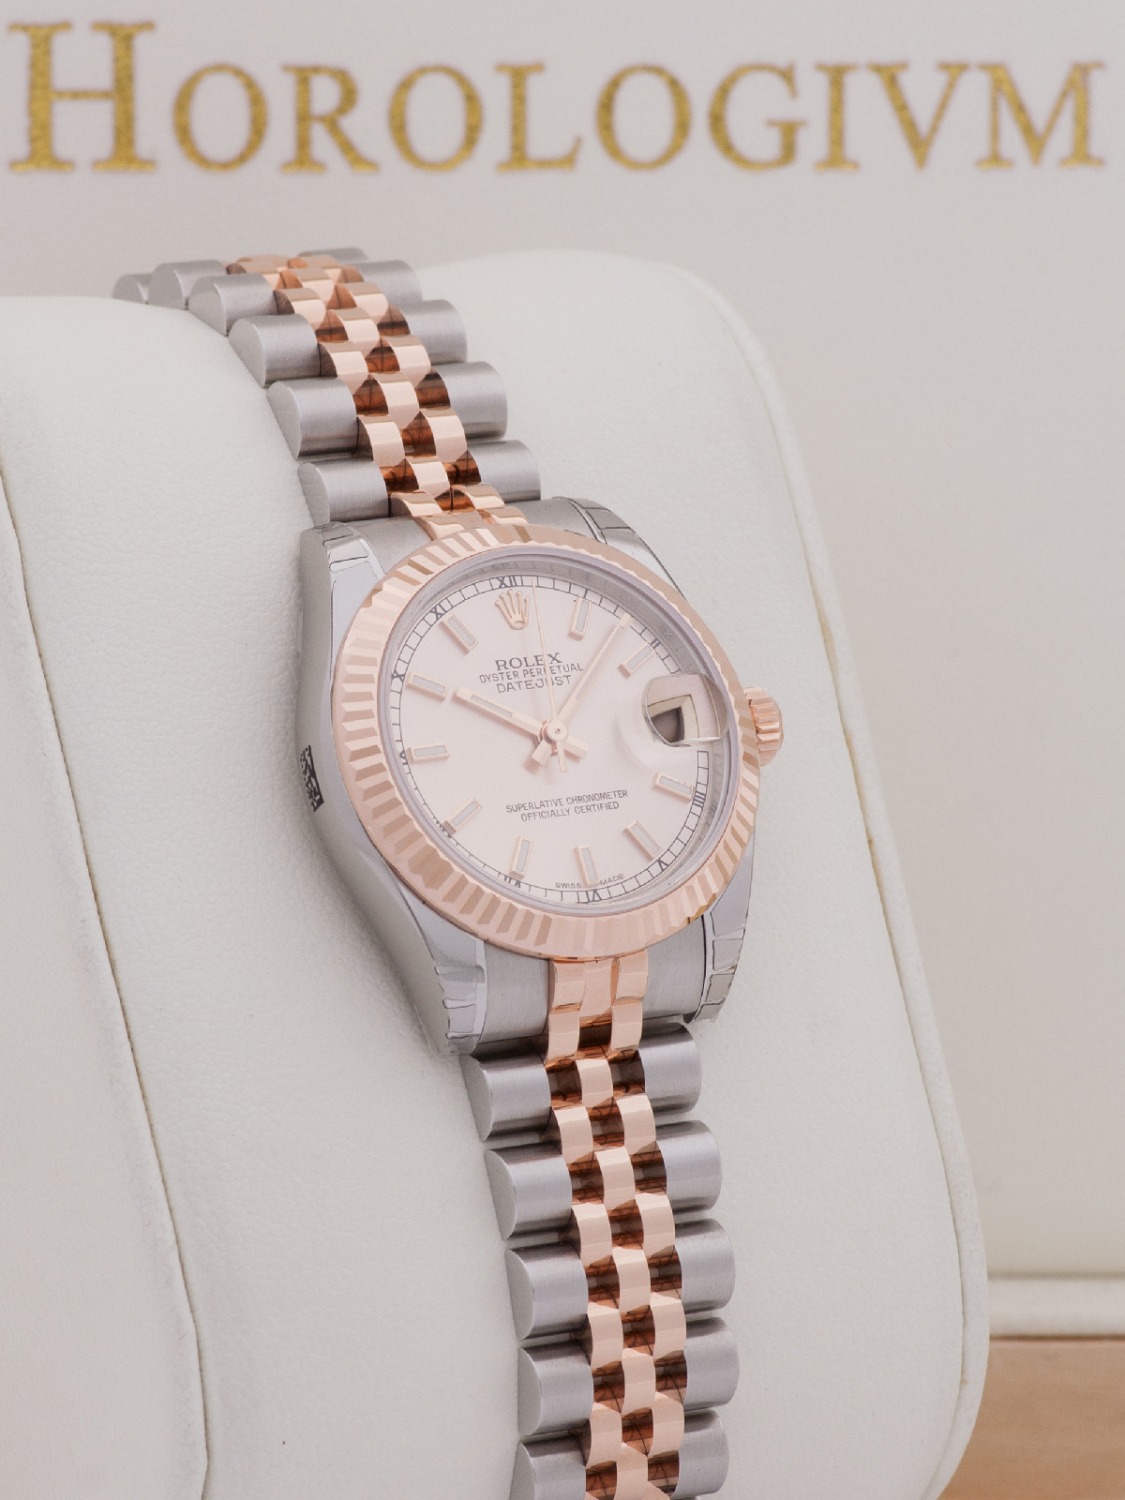 Rolex Datejust Two Tone 31MM Pink Dial watch, two - tone (bi - colored) silver and rose gold